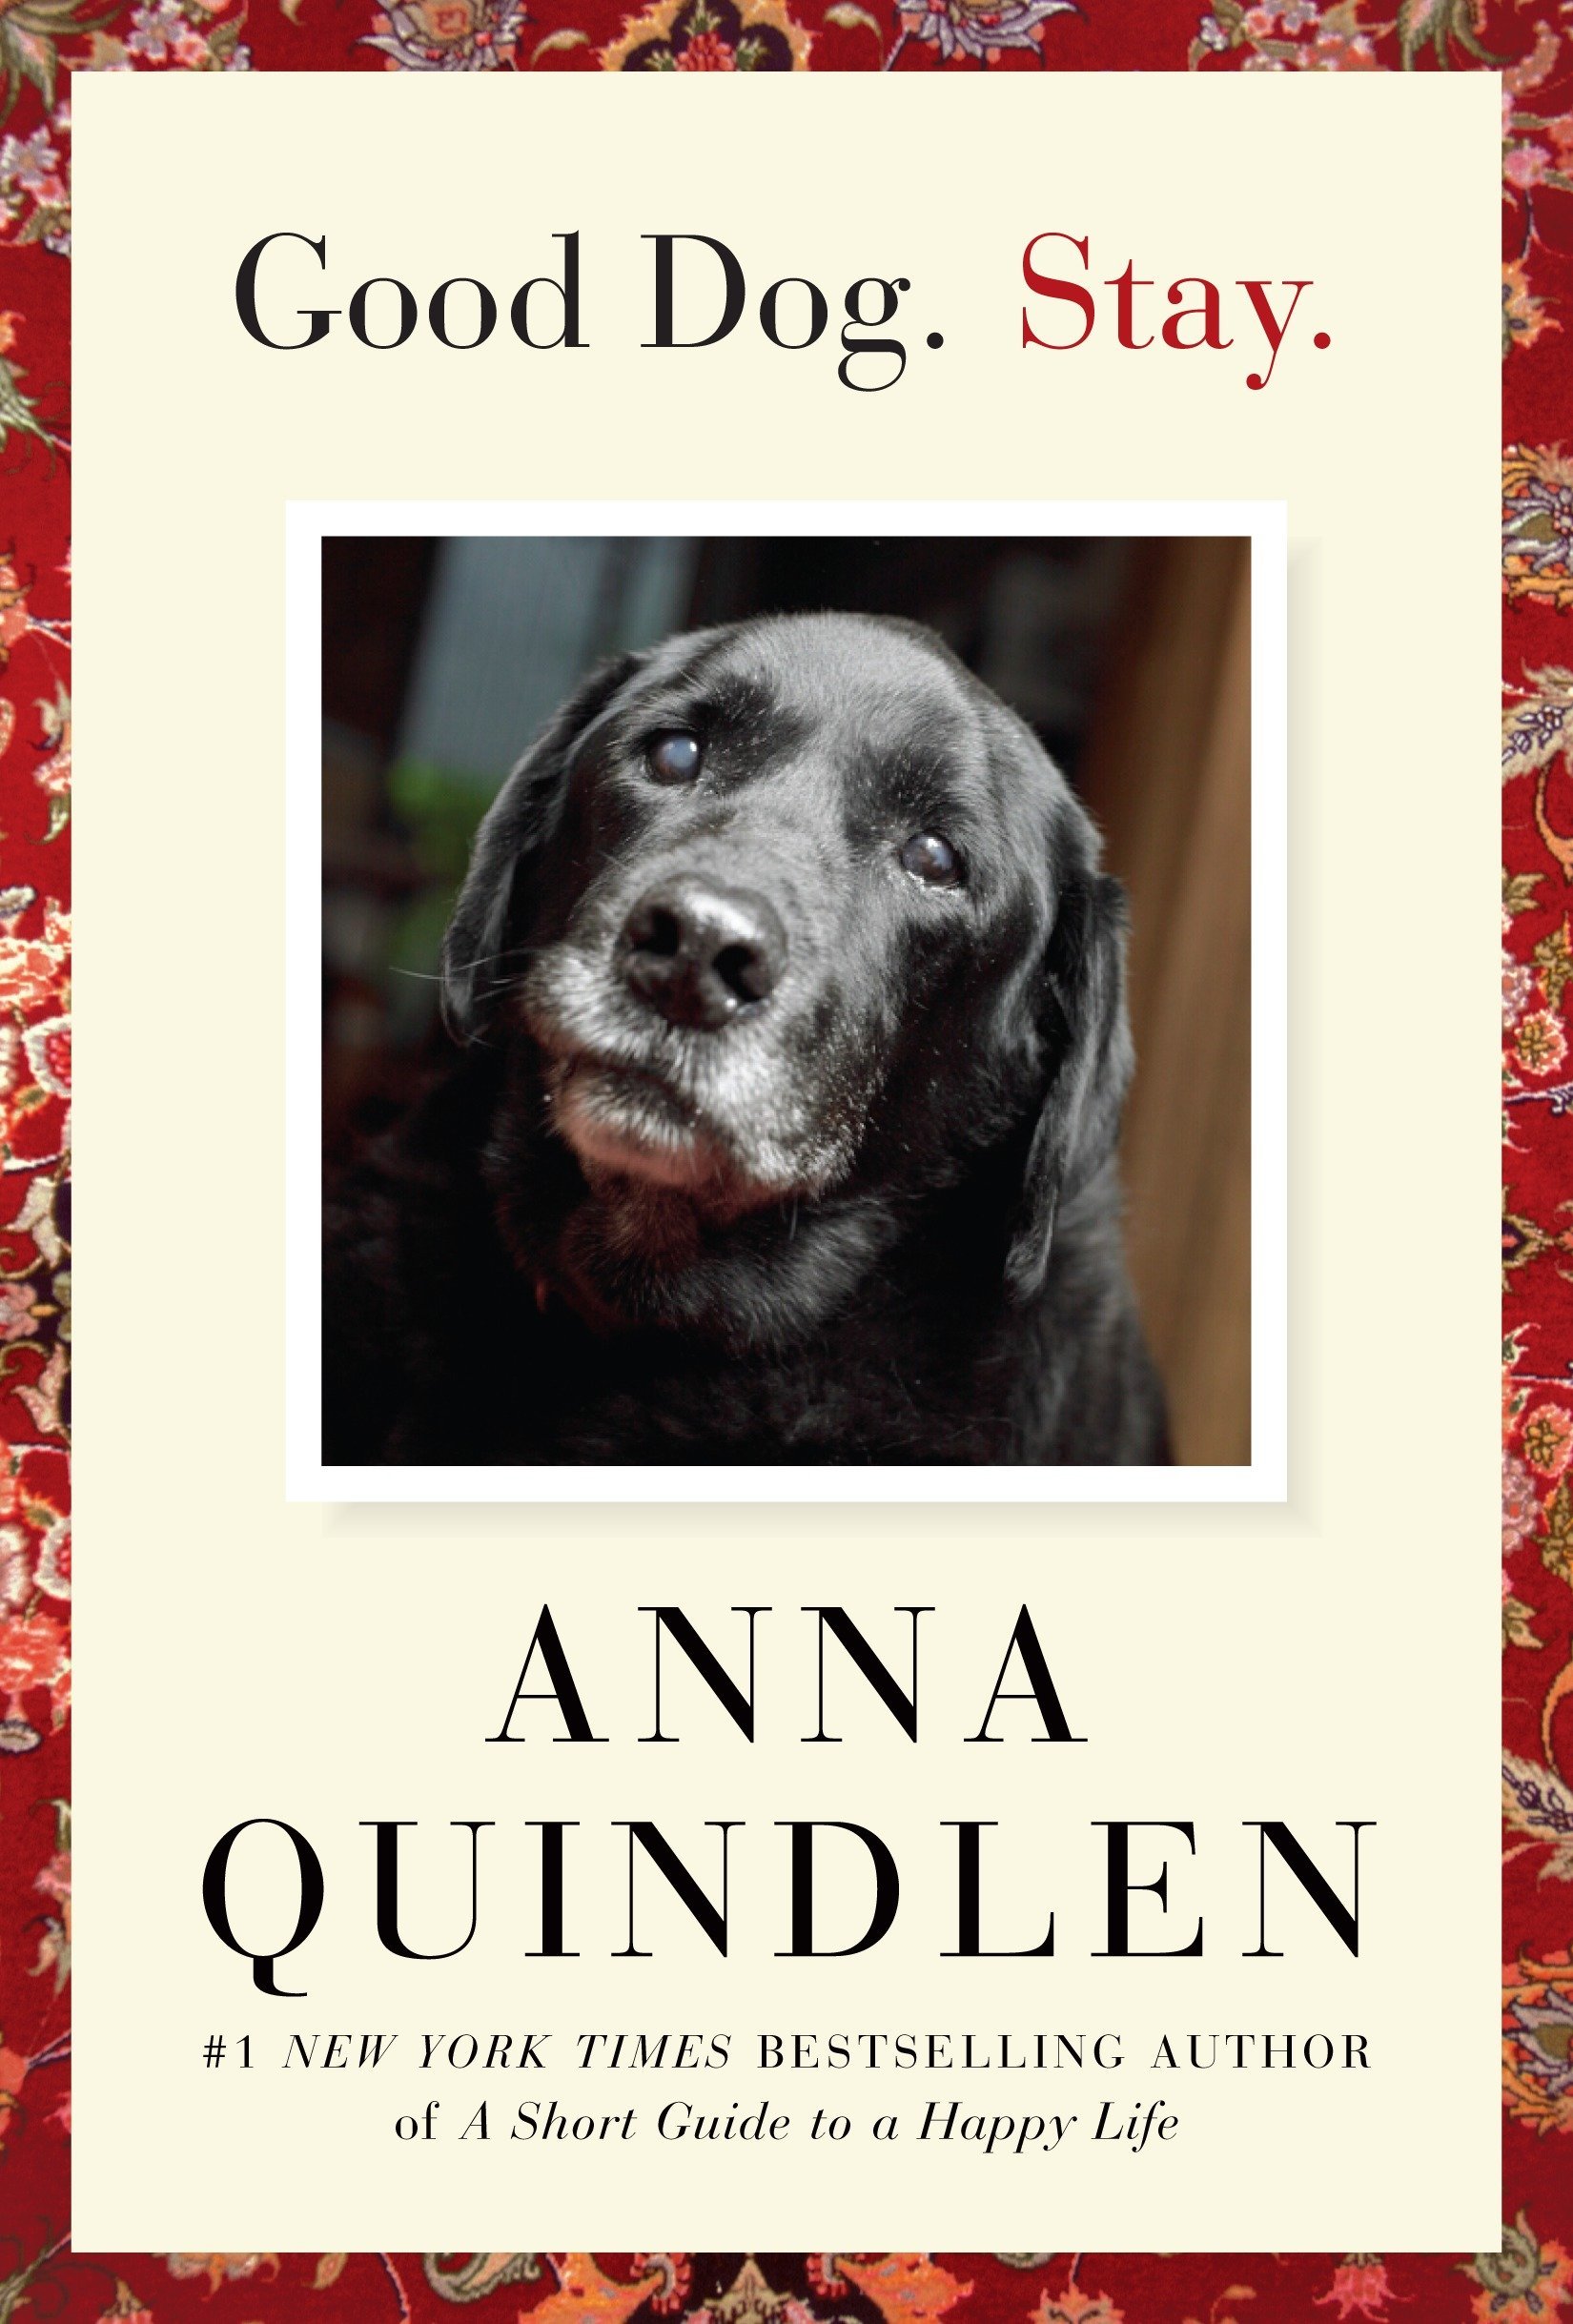 Good Dog Stay by Anna Quindlen